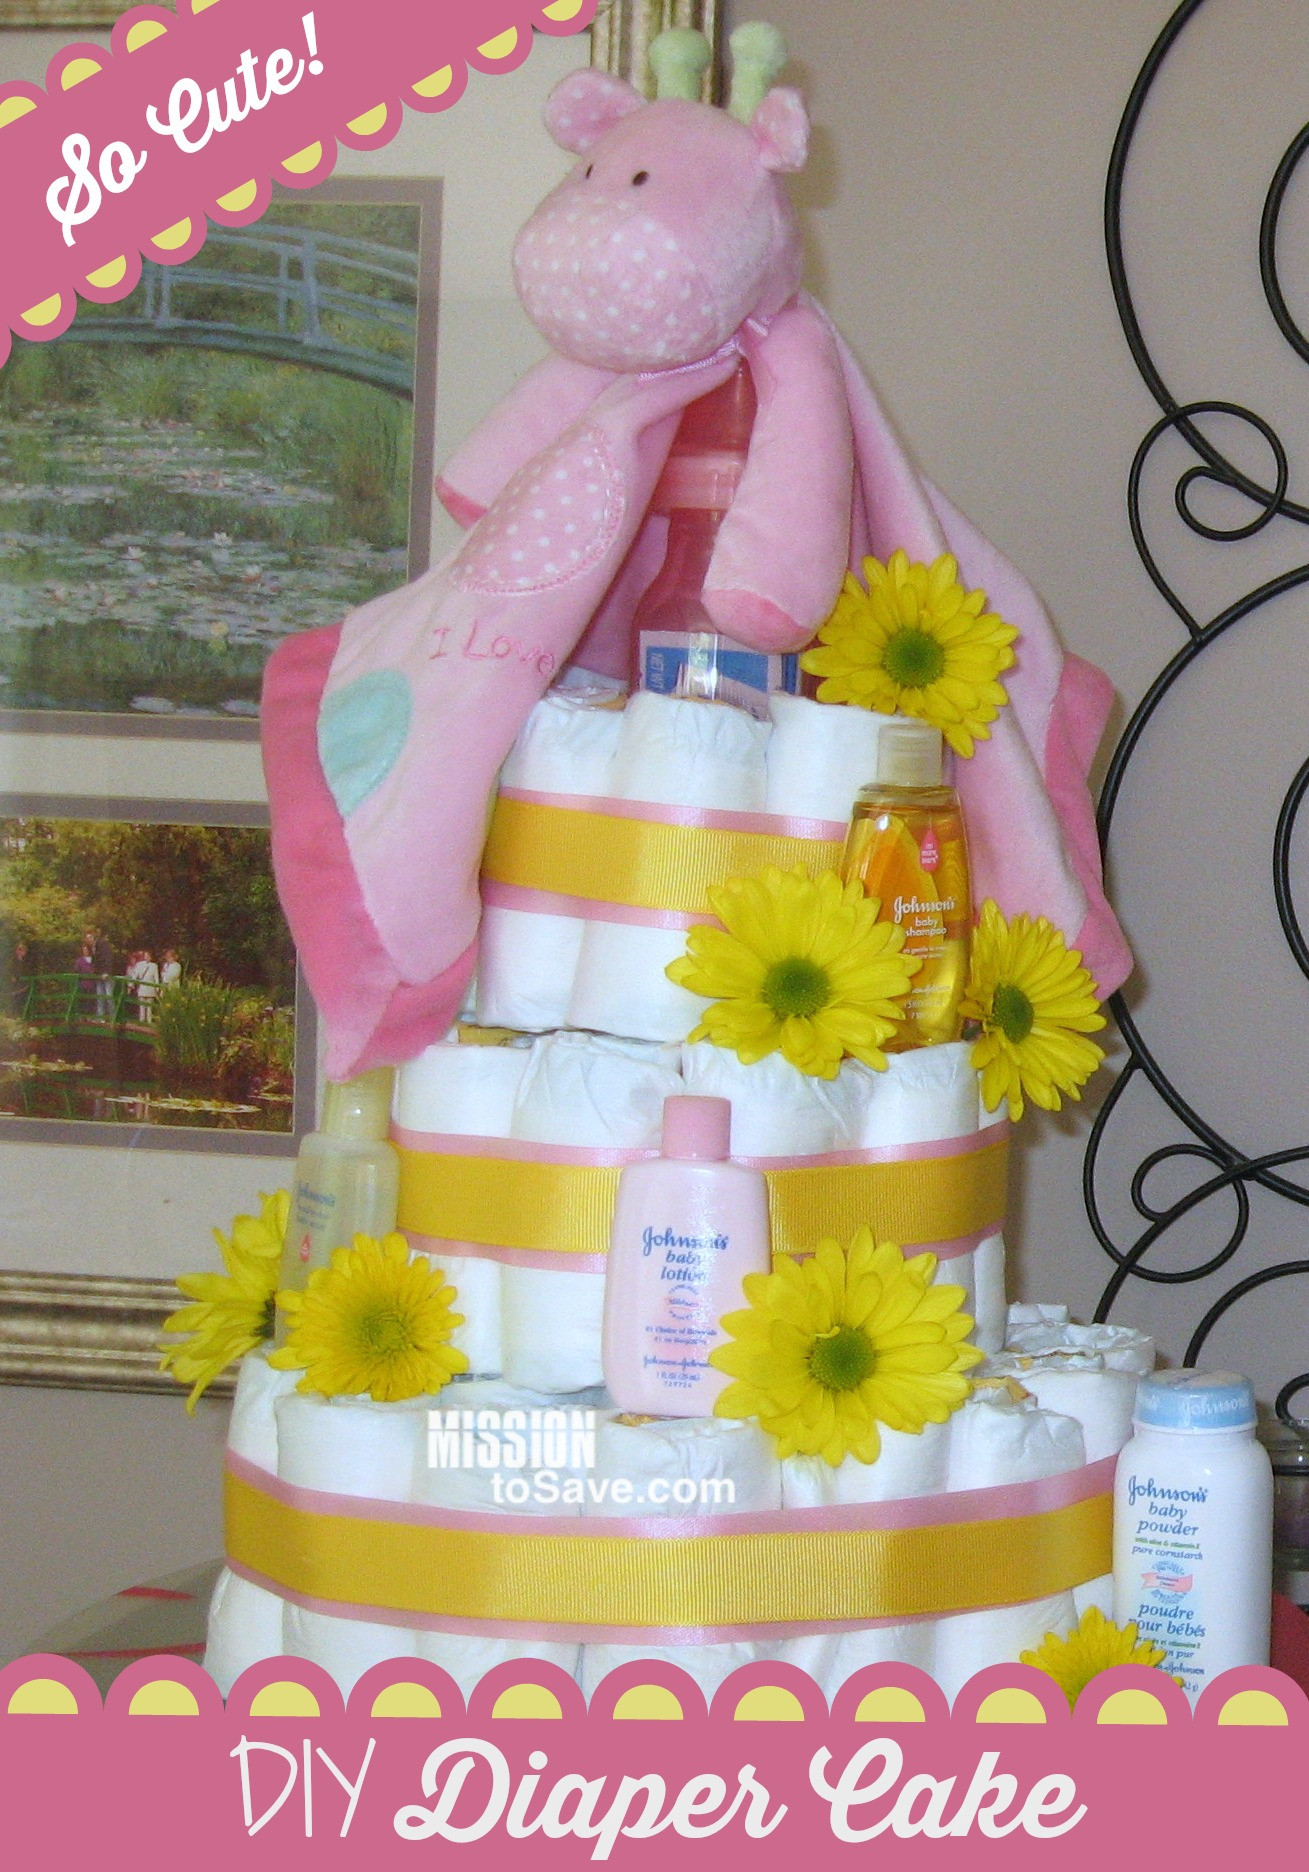 DIY Baby Diaper Cake
 Adorable Diaper Cake for DIY Baby Shower Gift Mission